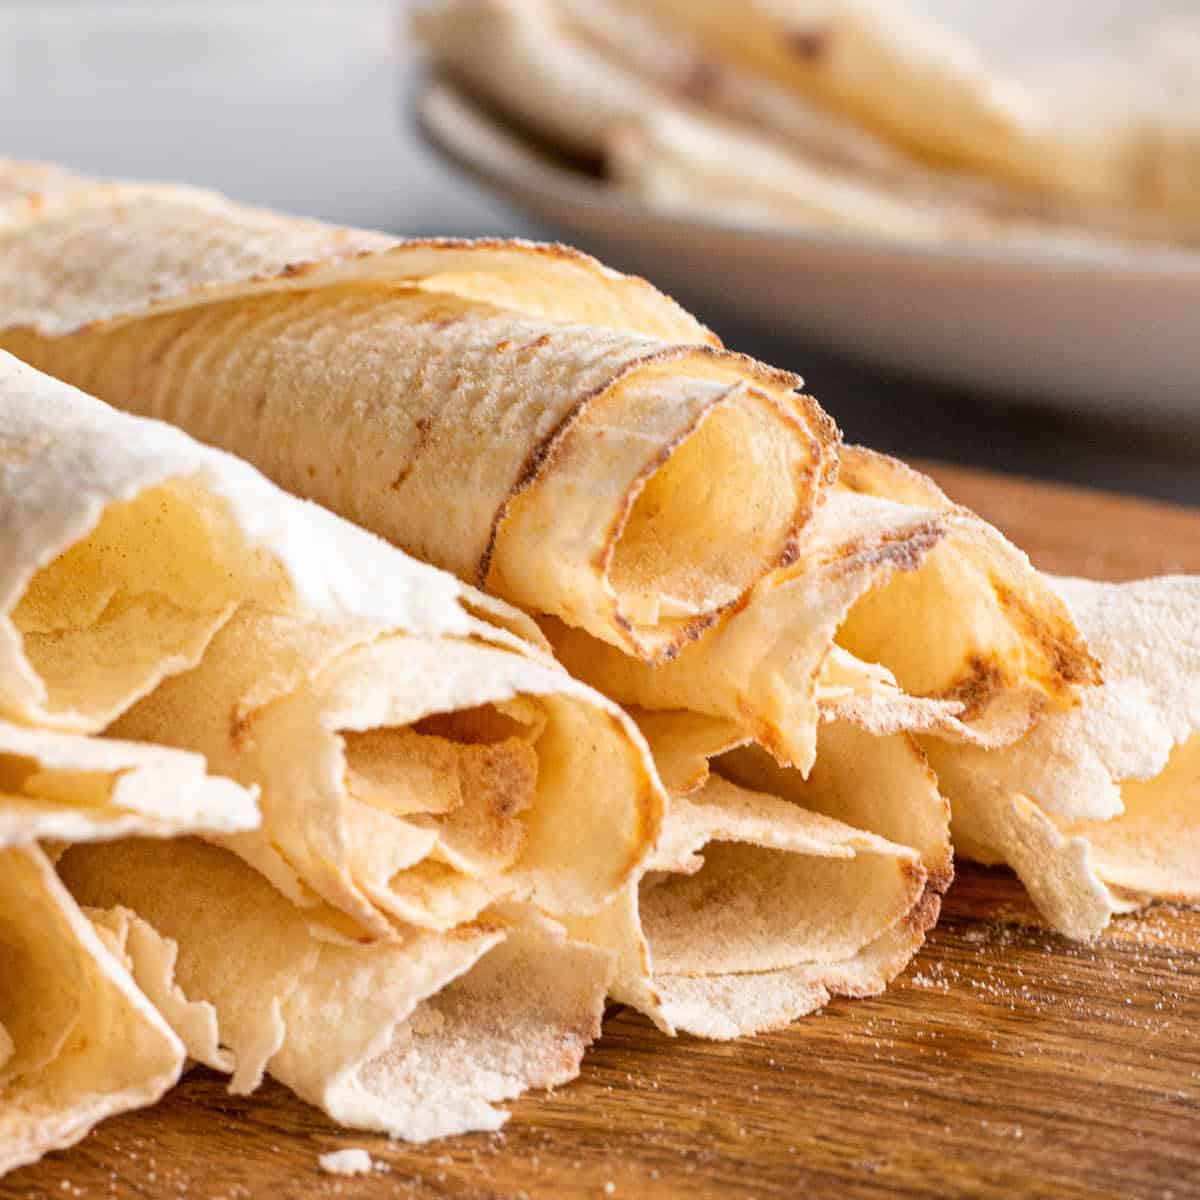 How To Make Norwegian Lefse From Scratch - Food Storage Moms